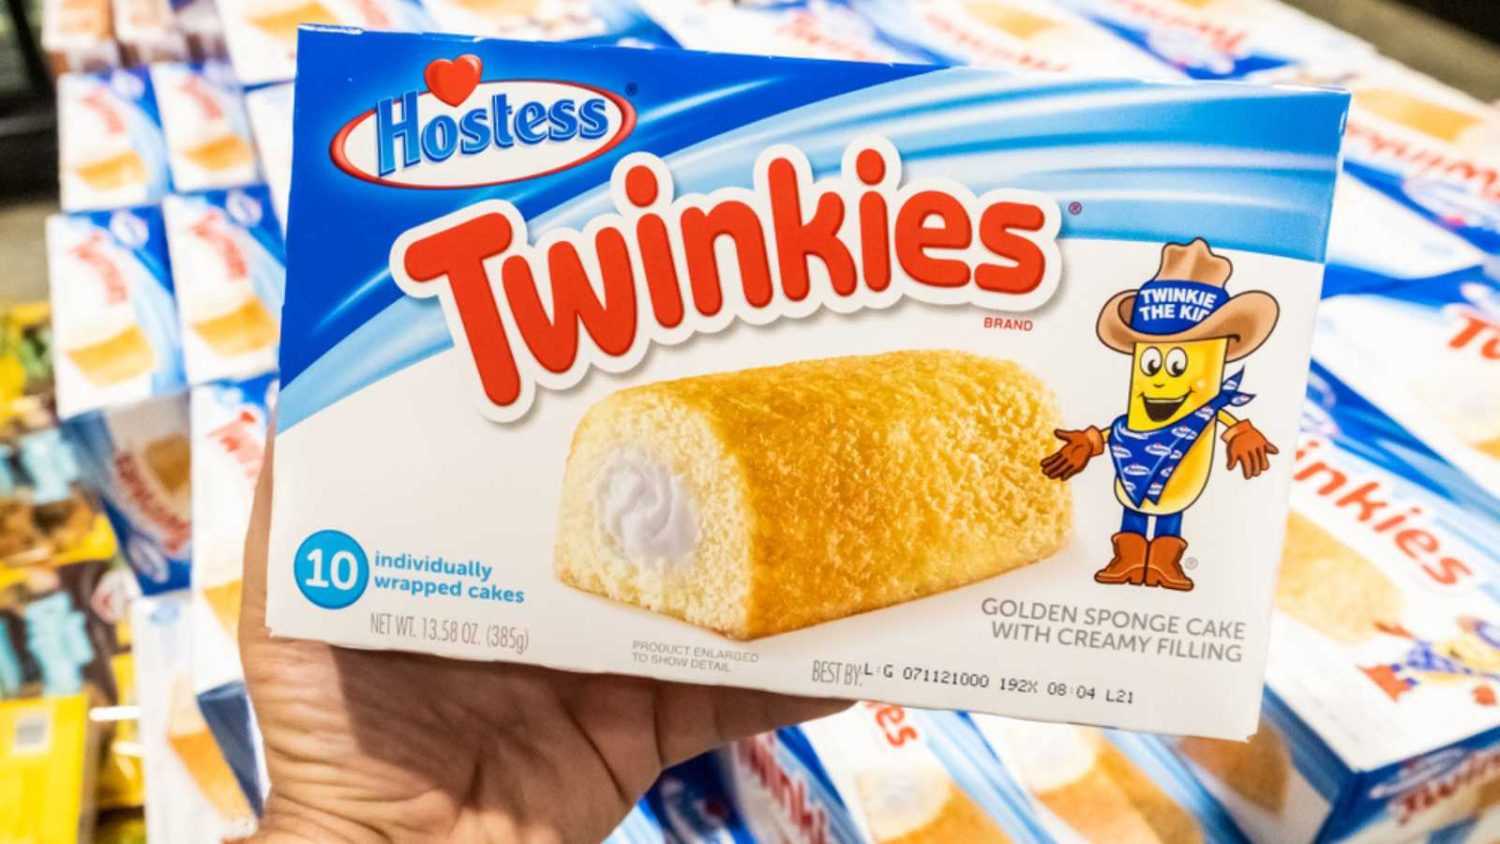 Los Angeles, CA/USA 08/20/2019 Shoppers hand holding a package of Twinkies brand golden sponge cakes with creamy filling in a supermarket aisle